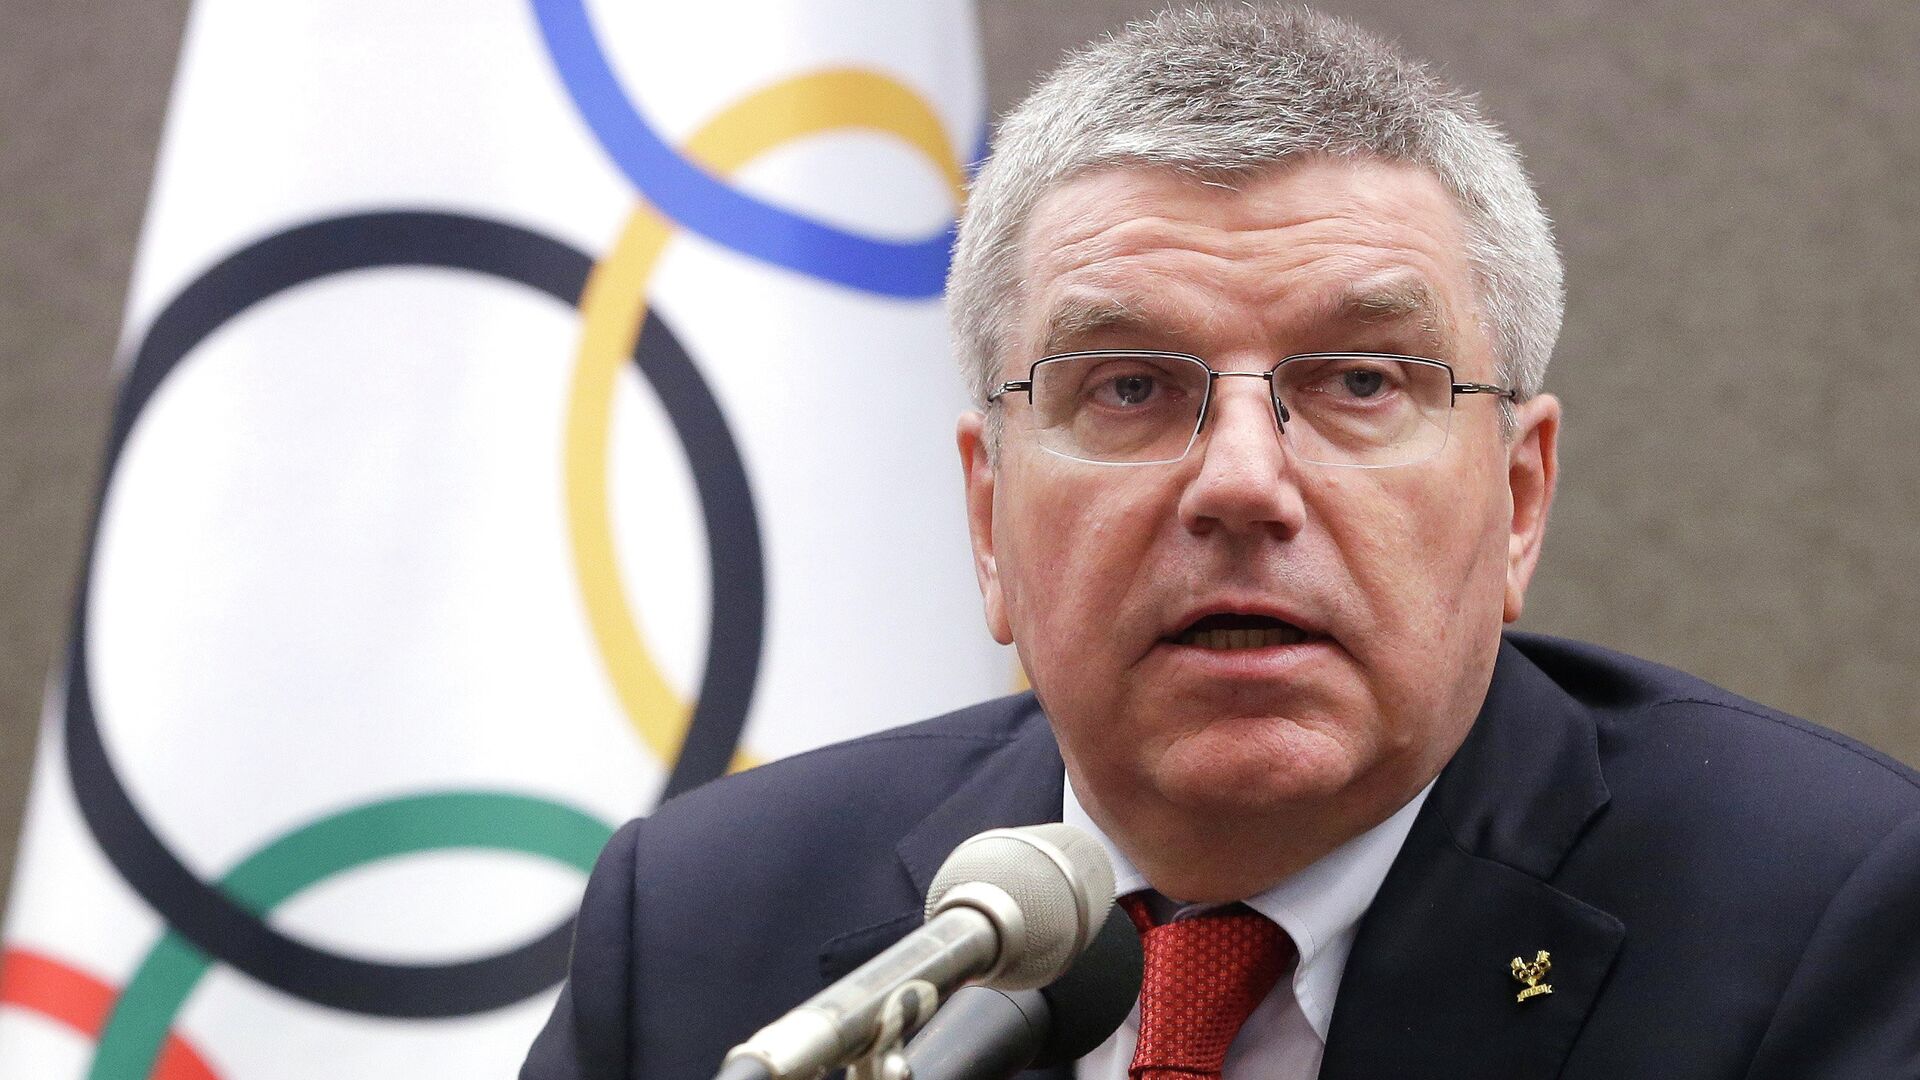 International Olympic Committee (IOC) President Thomas Bach speaks during a press conference in Seoul, South Korea, Wednesday, Aug. 19, 2015 - Sputnik Mundo, 1920, 08.08.2021